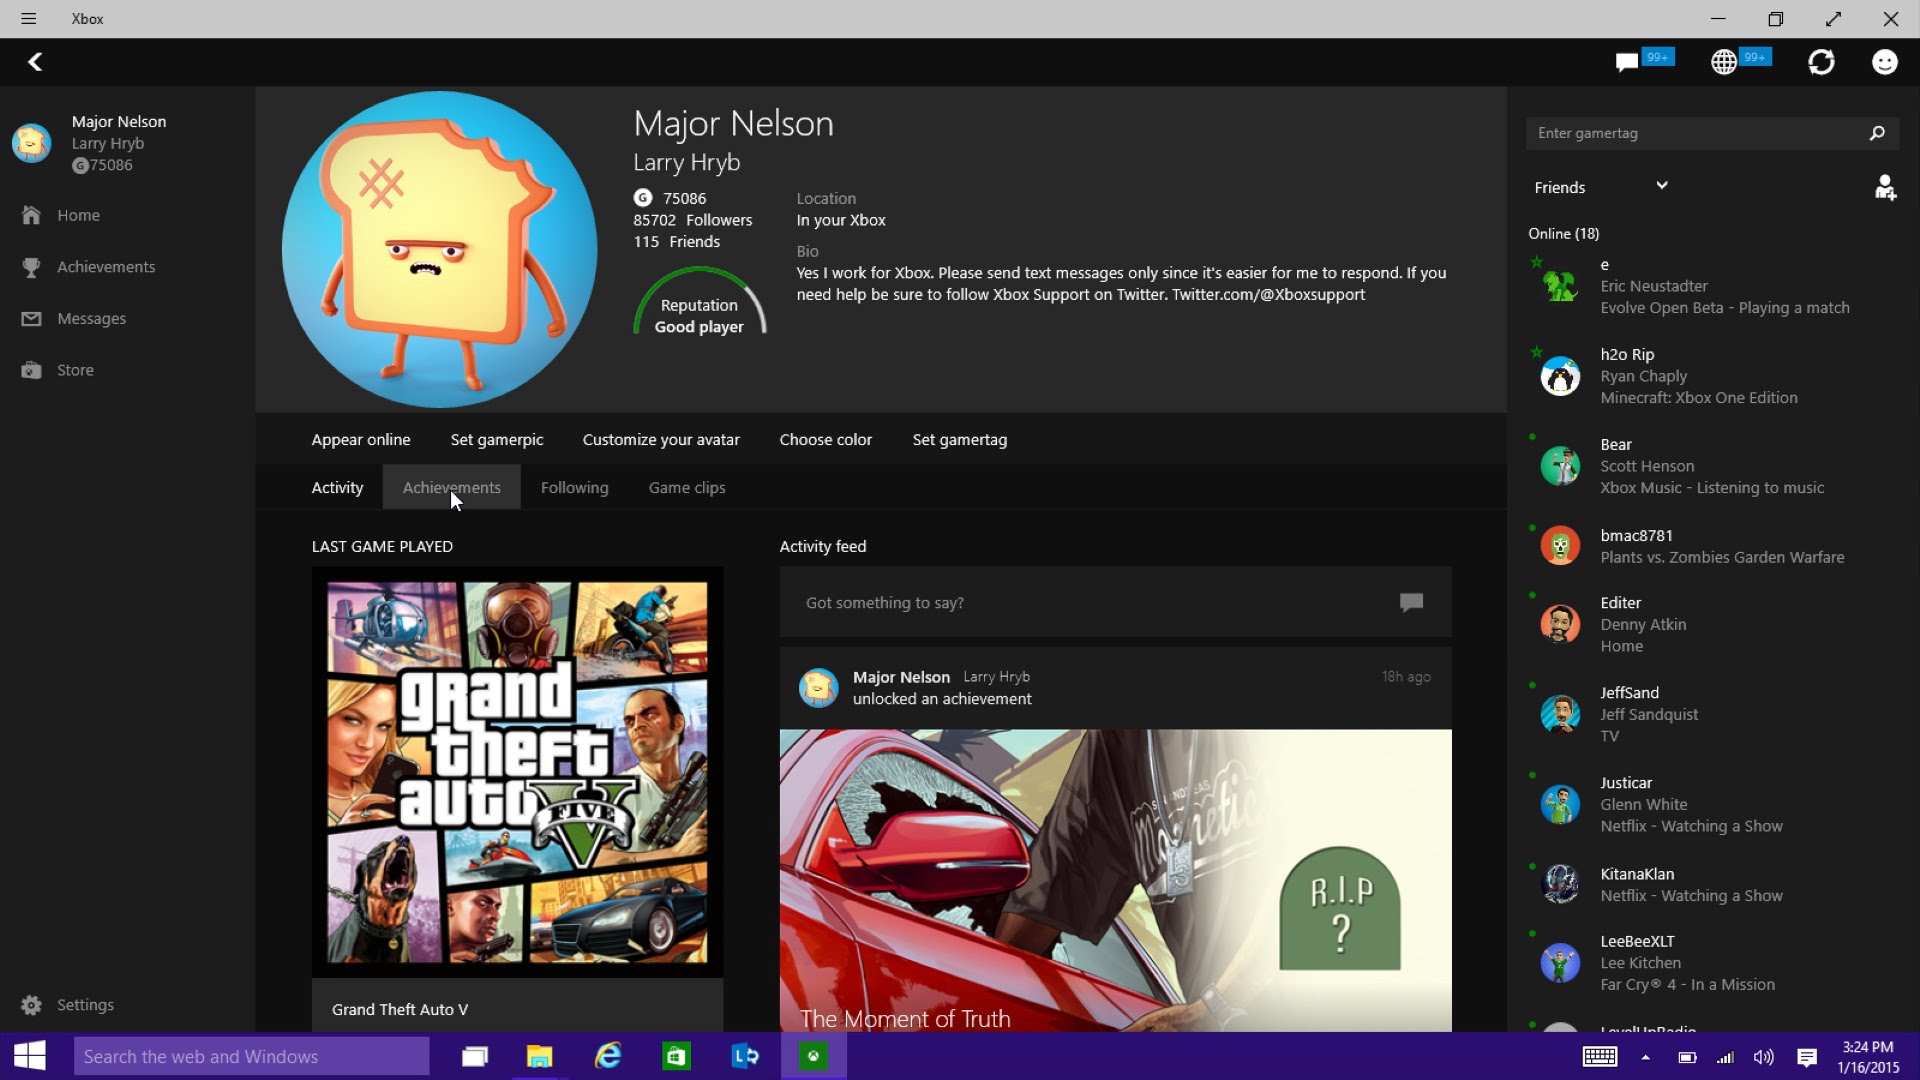 Video For Xbox on Windows Feature Summary for the January build of the Windows 10 Technical Preview